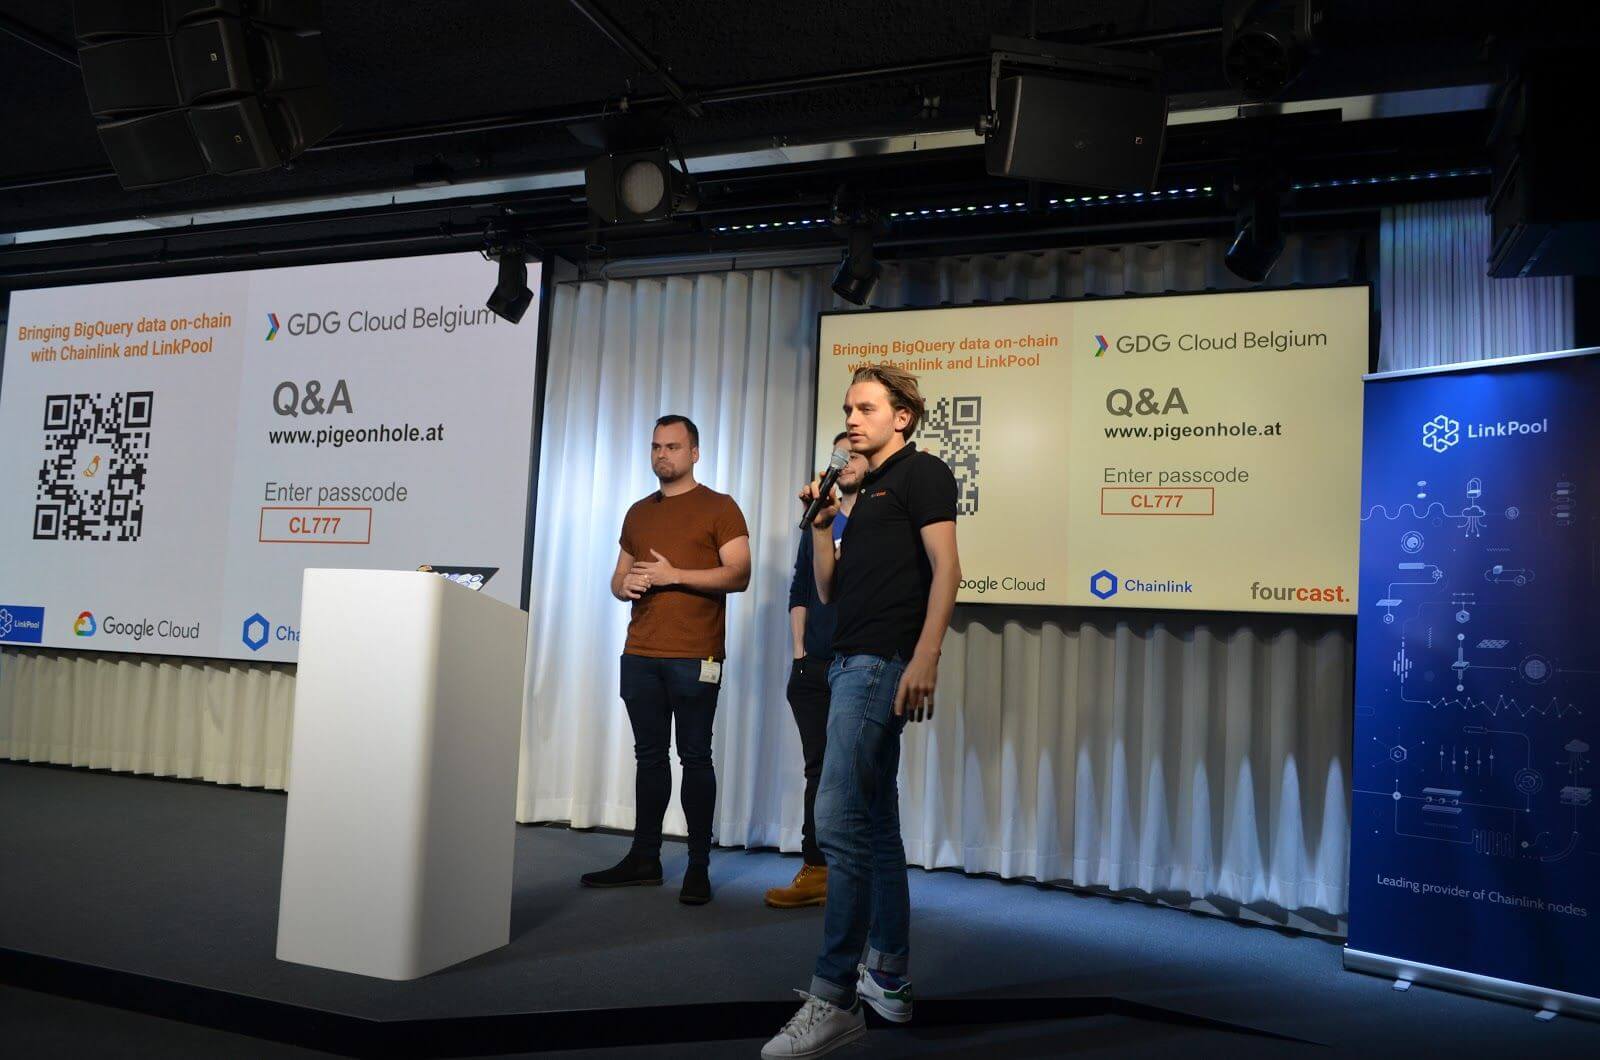 Niels Buekers, Head of Google Cloud Platform at Fourcast, and Jonny Huxtable, Co-founder of LinkPool, talk at a community meetup in Brussels about bringing Google’s BigQuery data on-chain using Chainlink